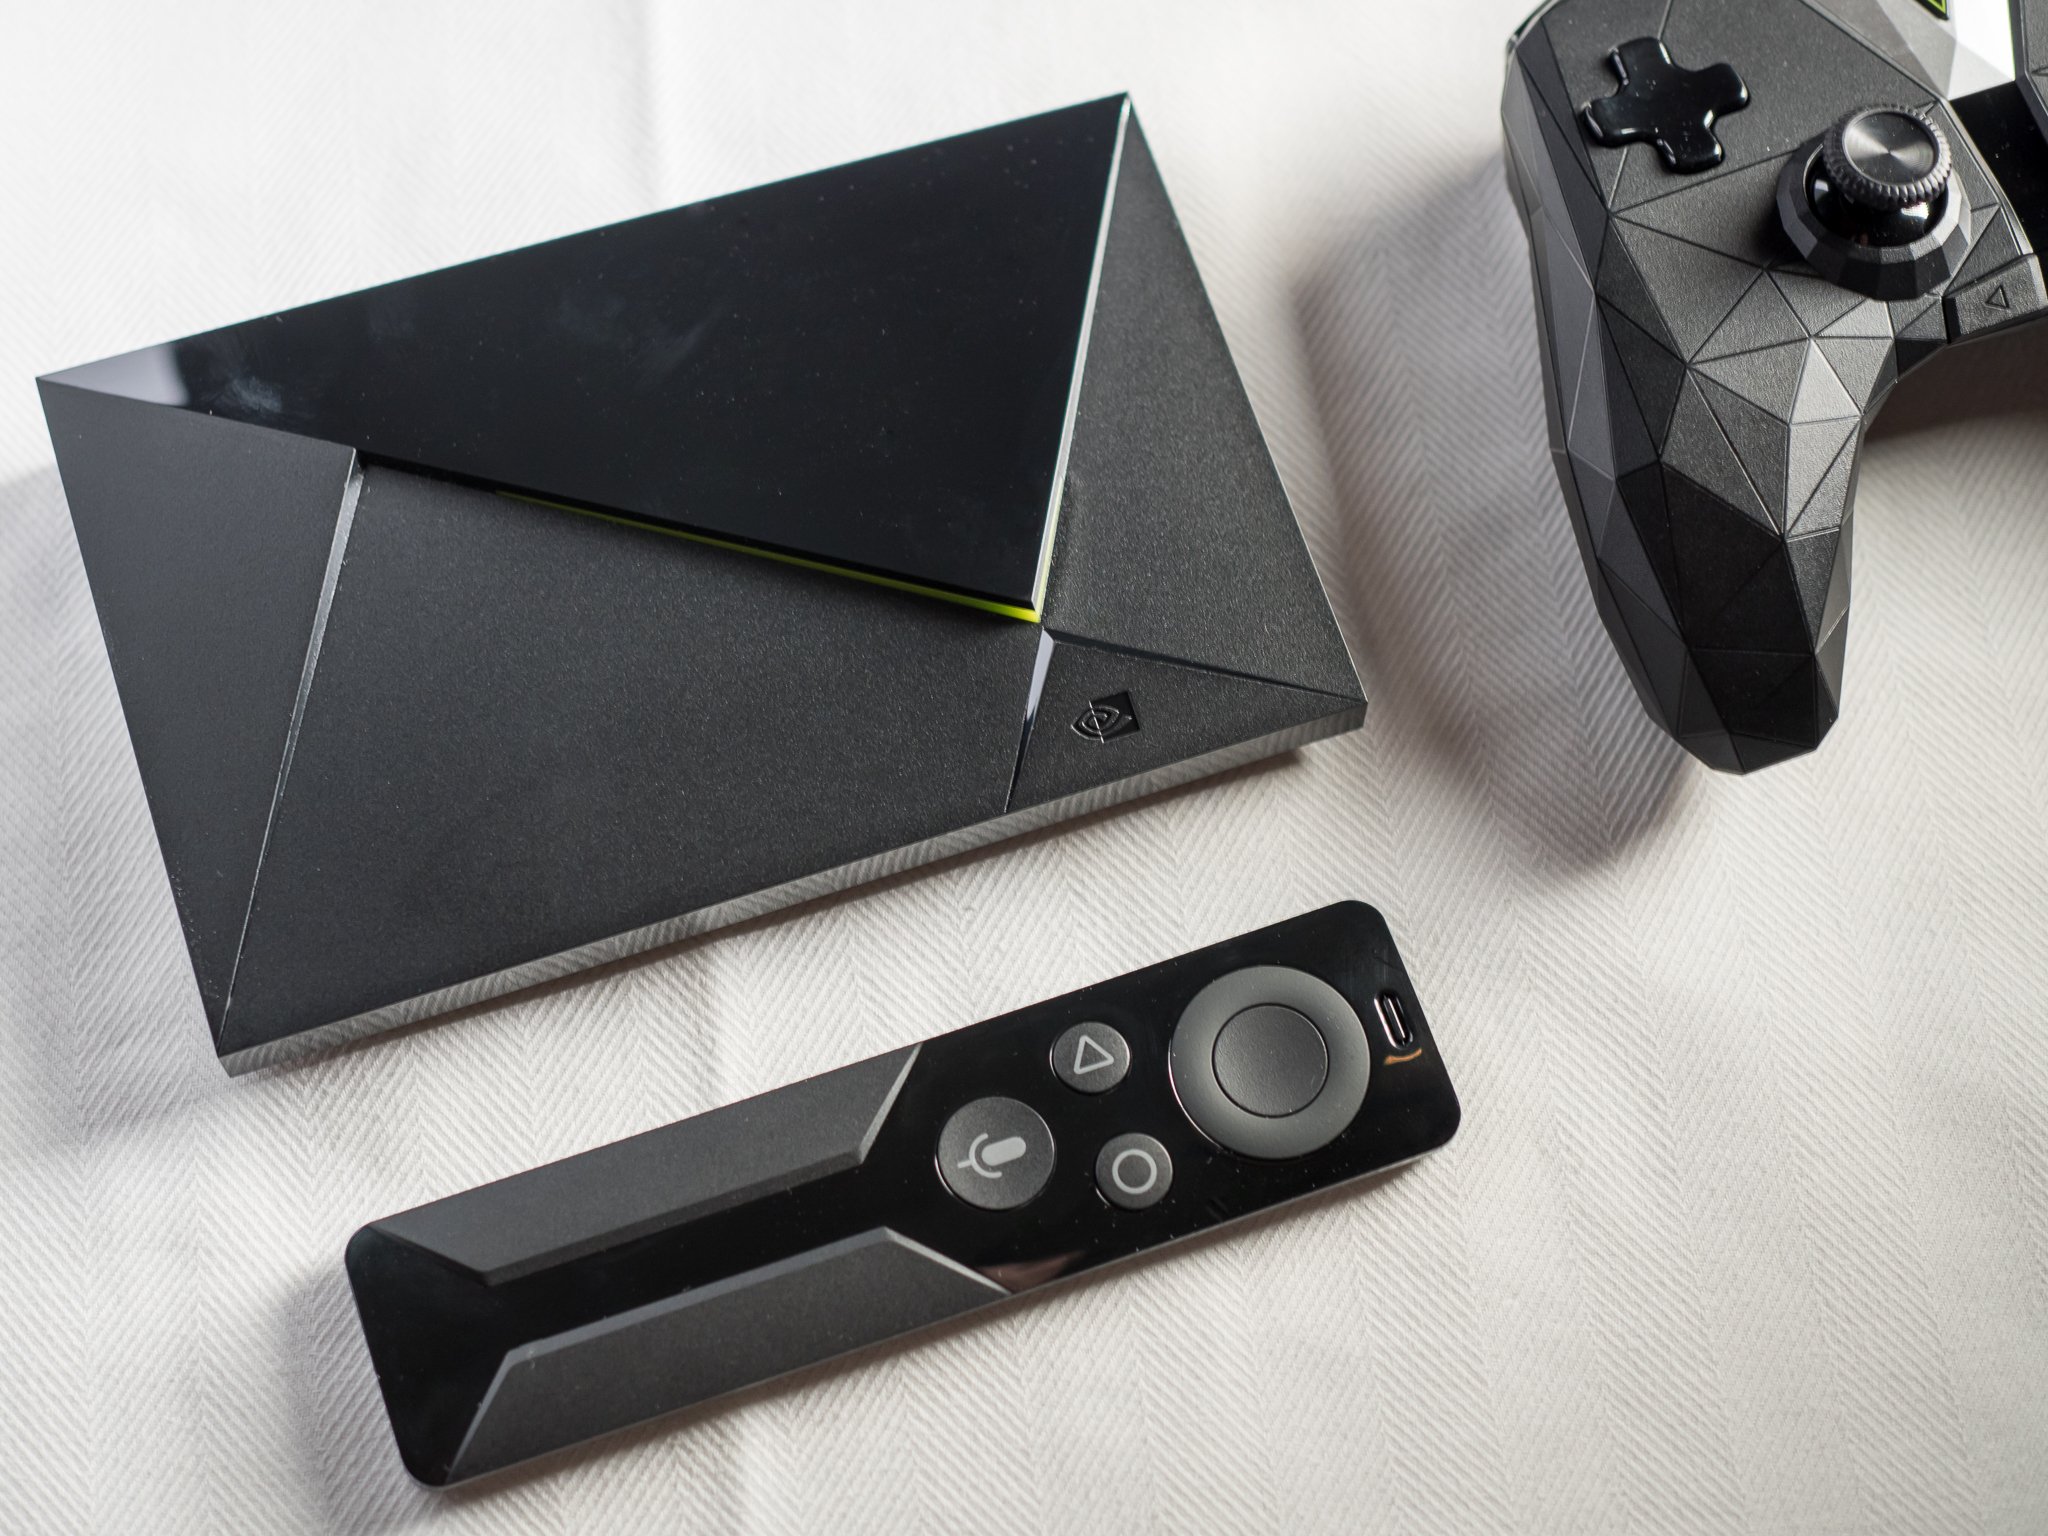 Steam Link Vs Nvidia Shield Tv Which Is Best For Pc Game